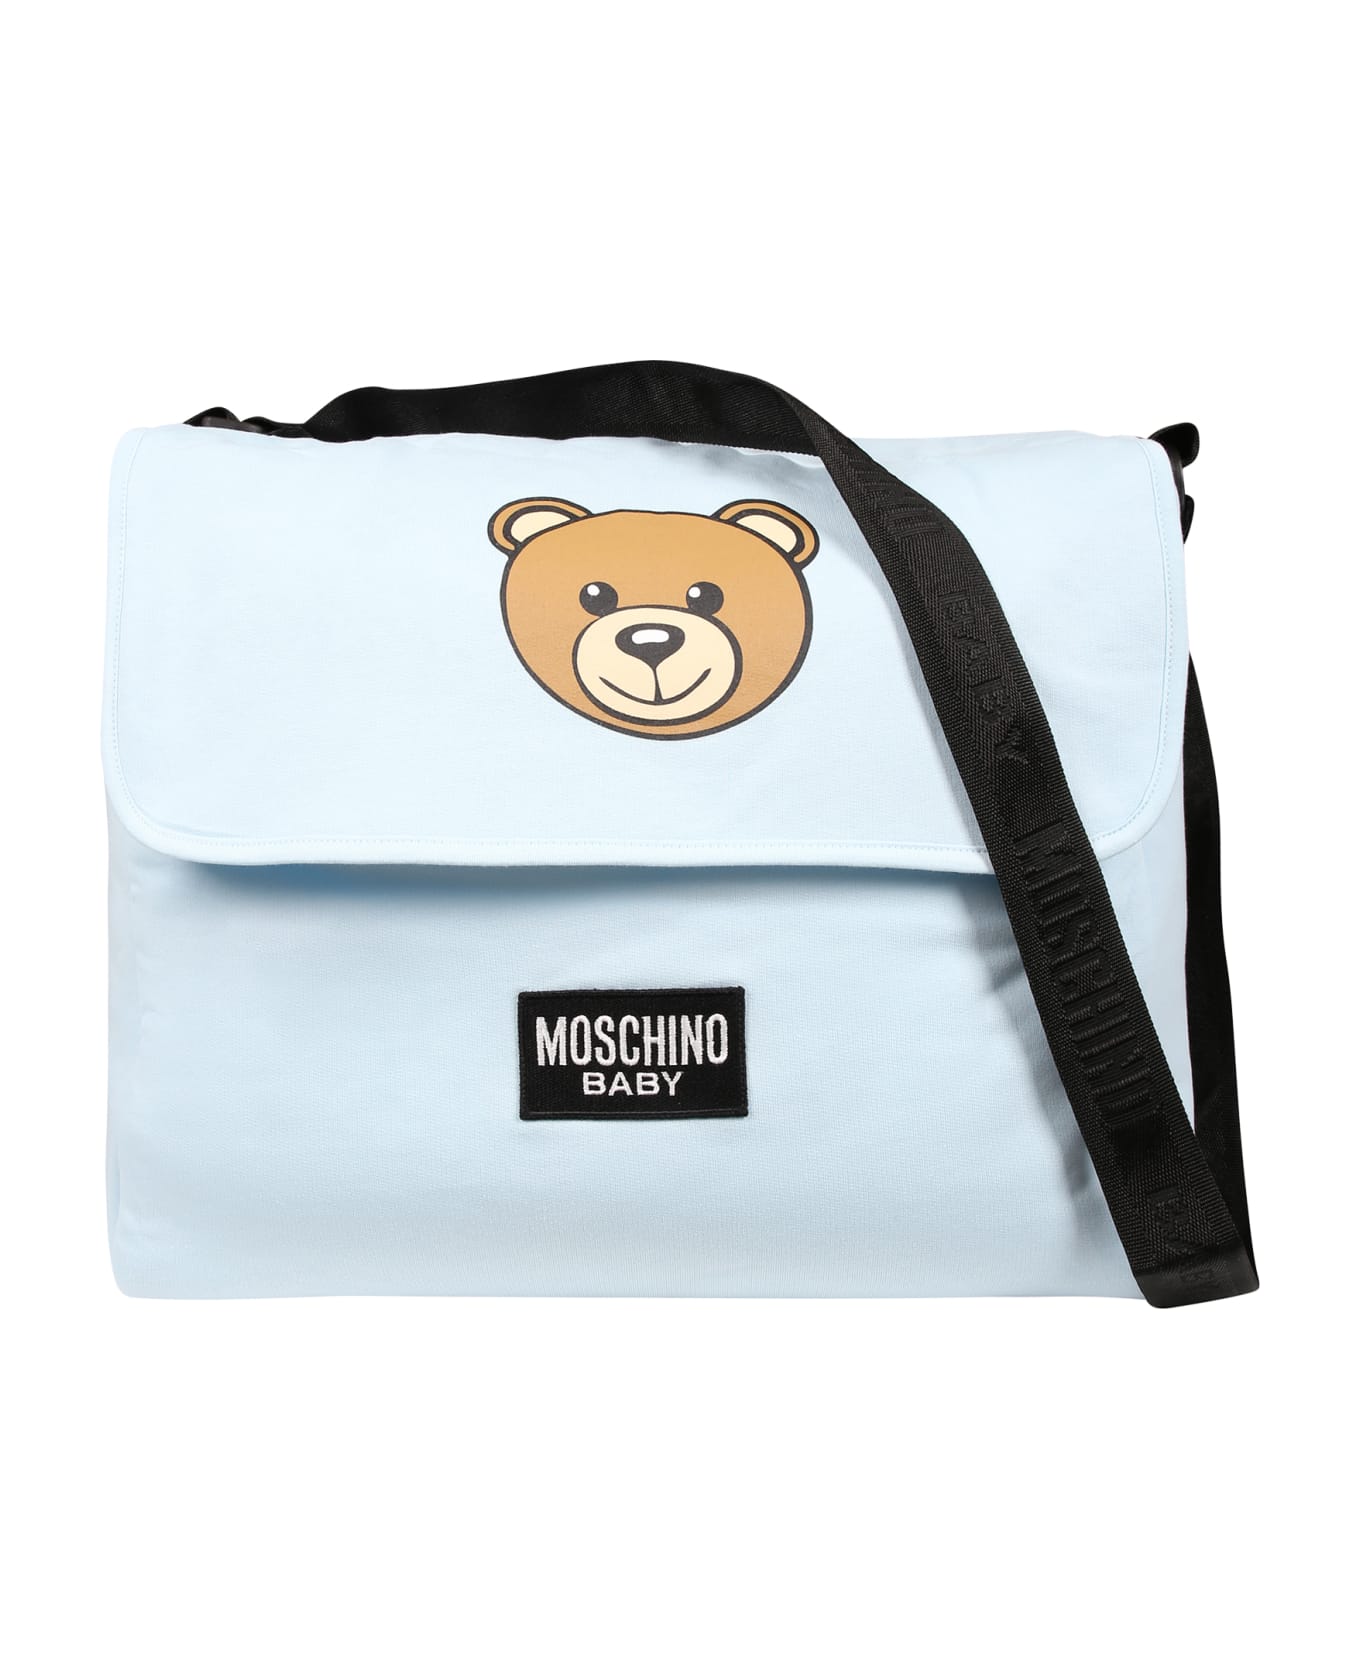 Moschino Light Blue Mother Bag For Baby Boy With Teddy Bear And Logo - Light Blue アクセサリー＆ギフト